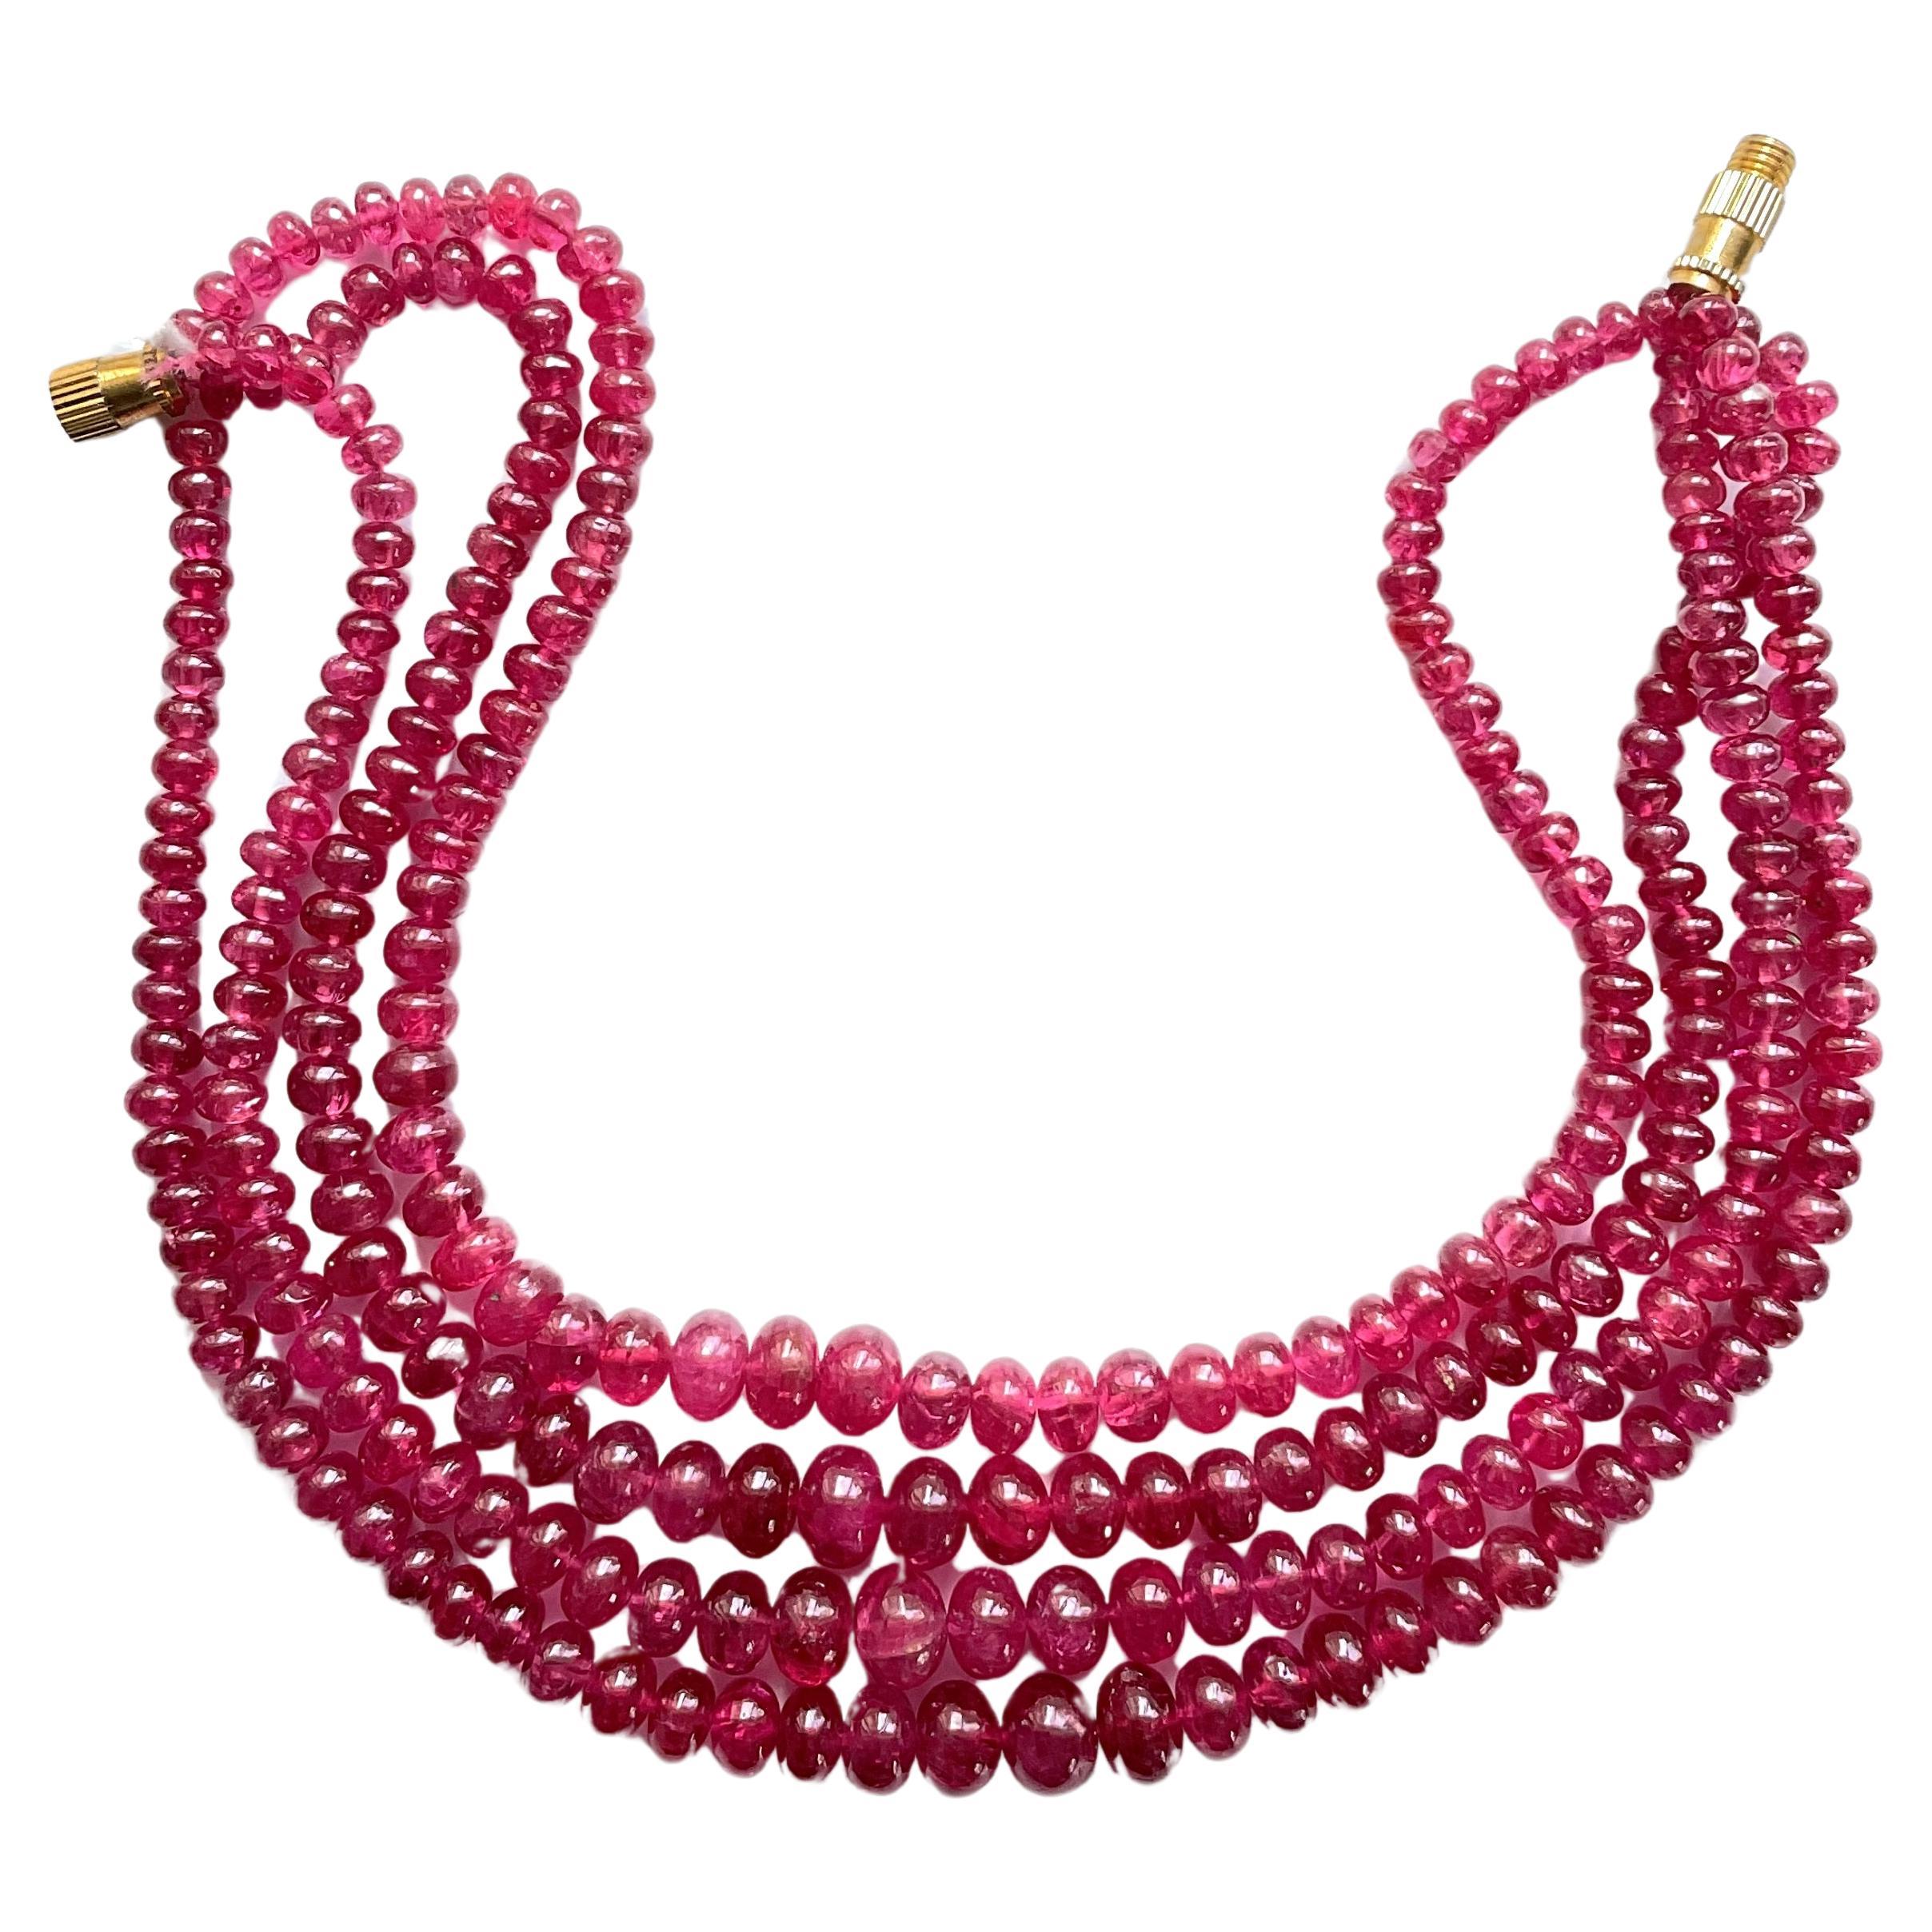 165.75 Carats Burma Red Spinel Beads Top Quality Beaded Necklace Natural Gem For Sale